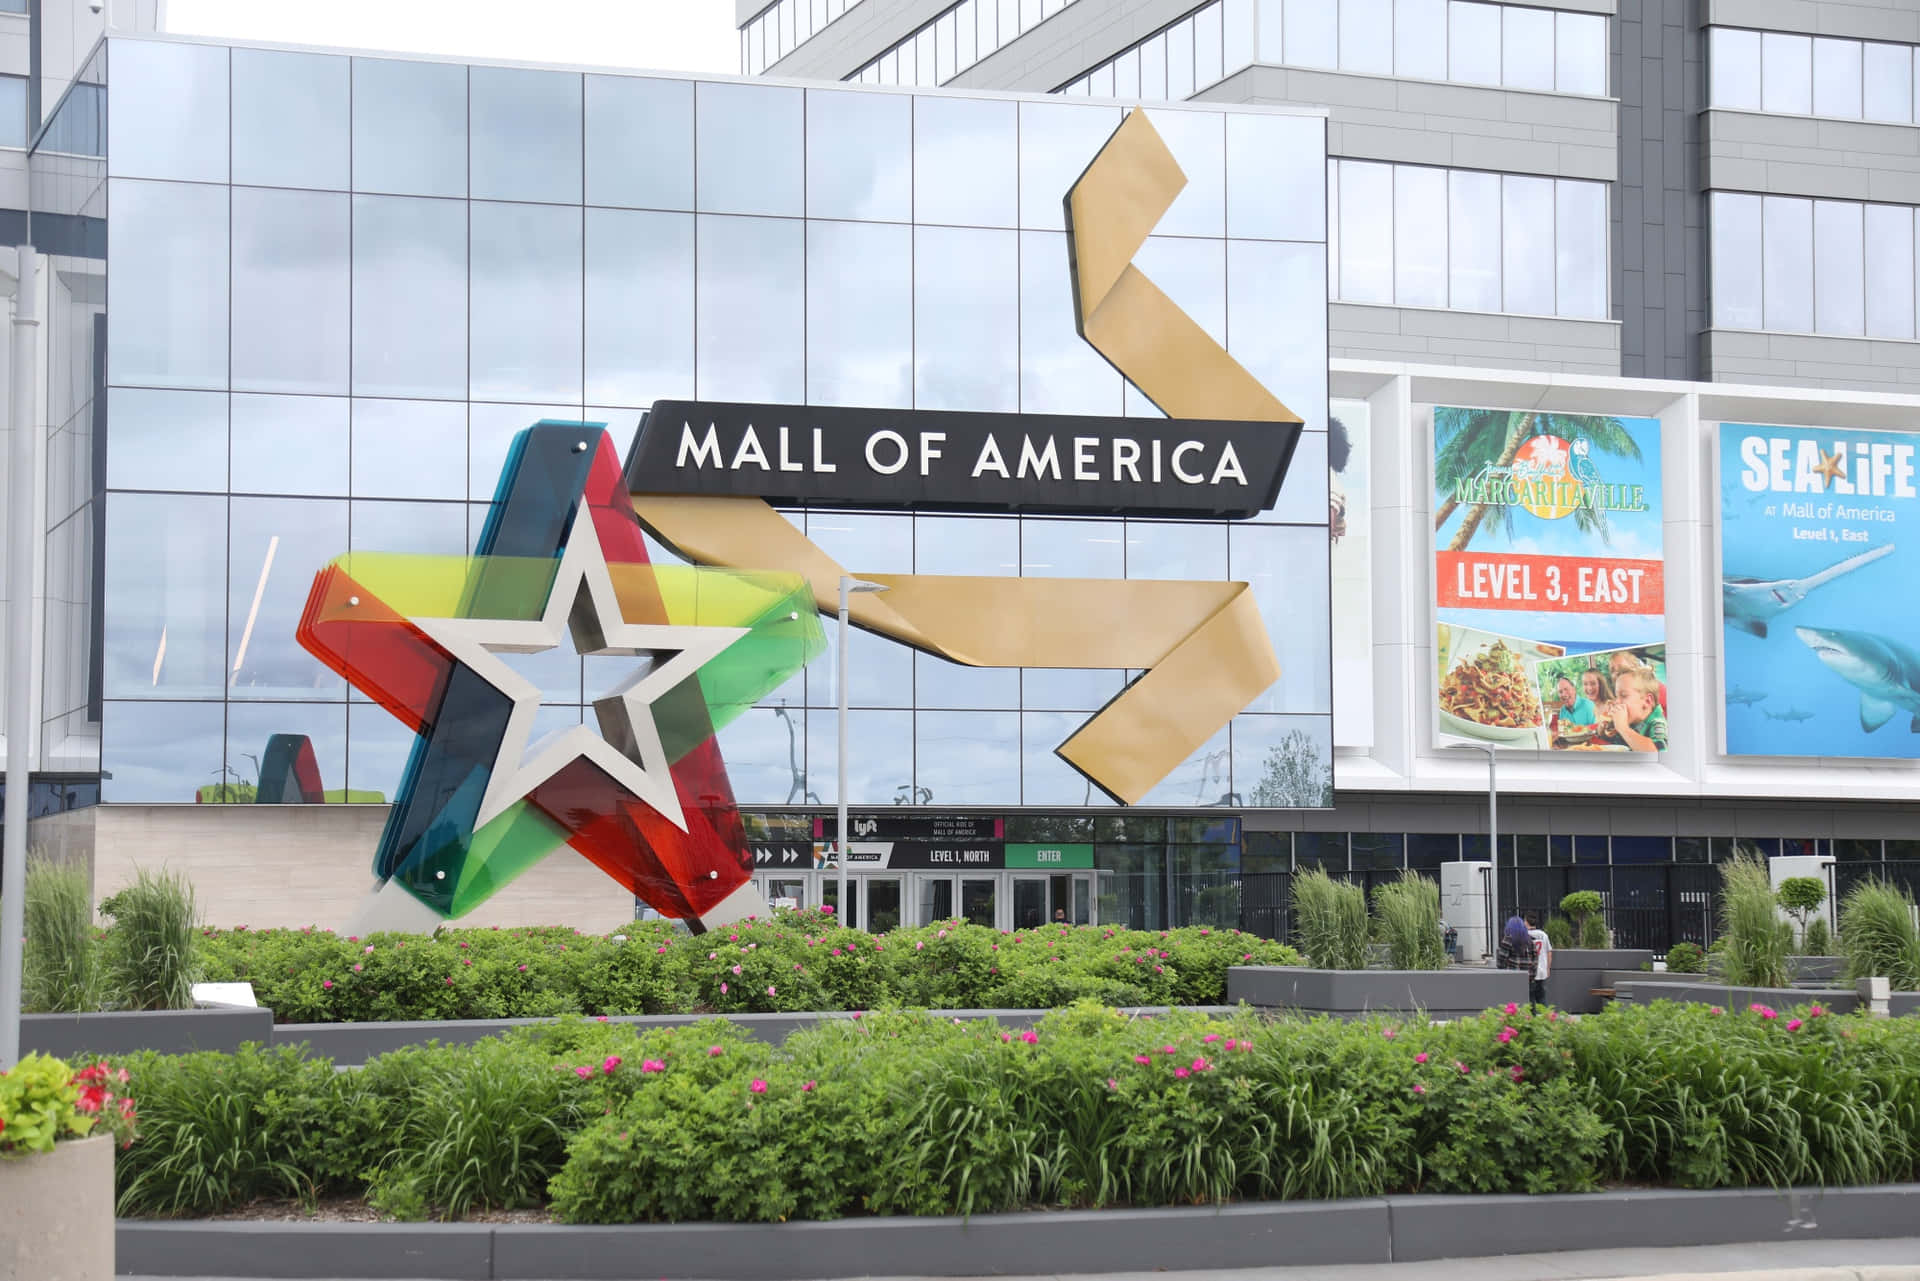 "Shop 'Til You Drop at Mall of America!"